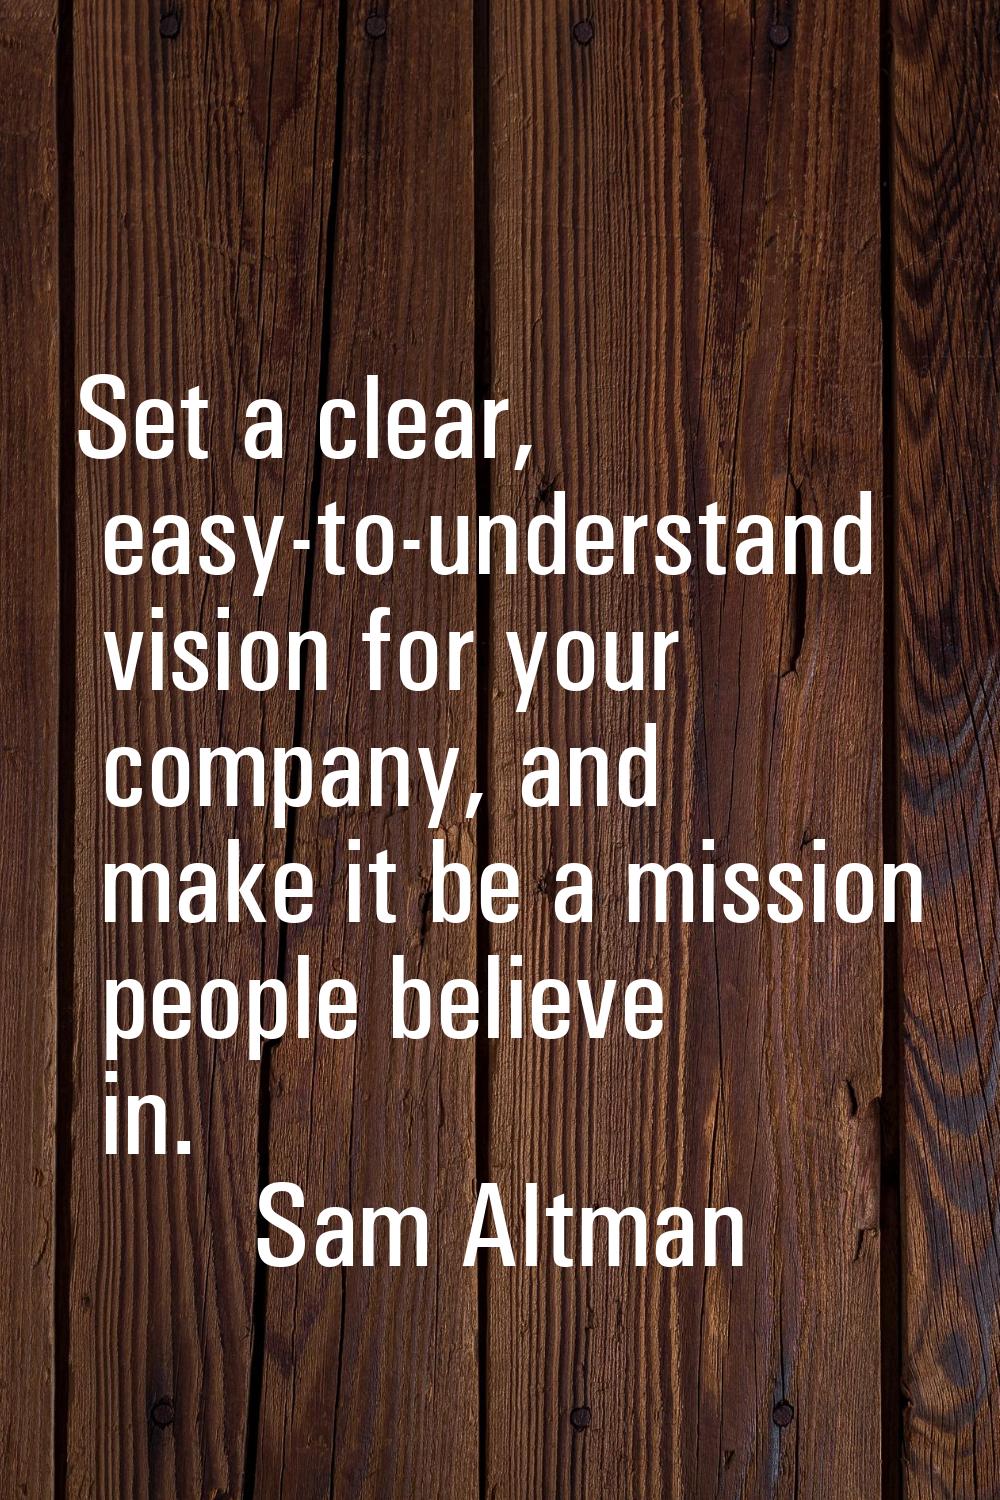 Set a clear, easy-to-understand vision for your company, and make it be a mission people believe in